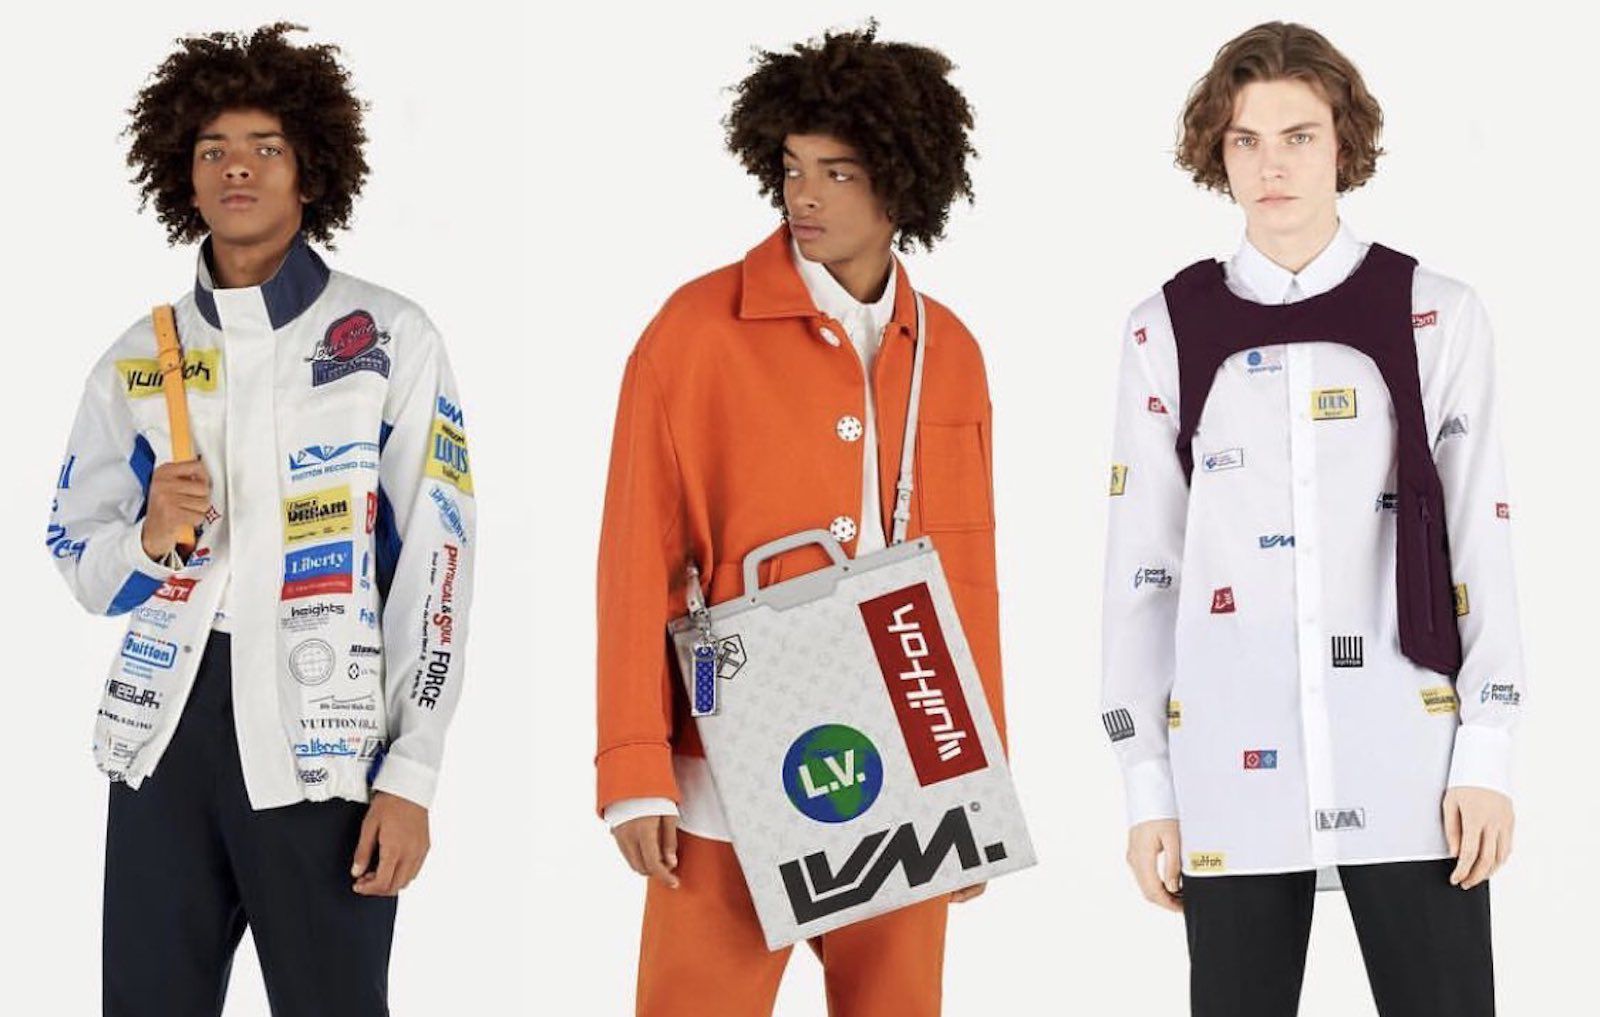 2019. Set against a rainbow runway, Virgil Abloh's debut SS19 collection  for LOUIS VUITTON referenced 'The Wizard of Oz' as a metaphor for…